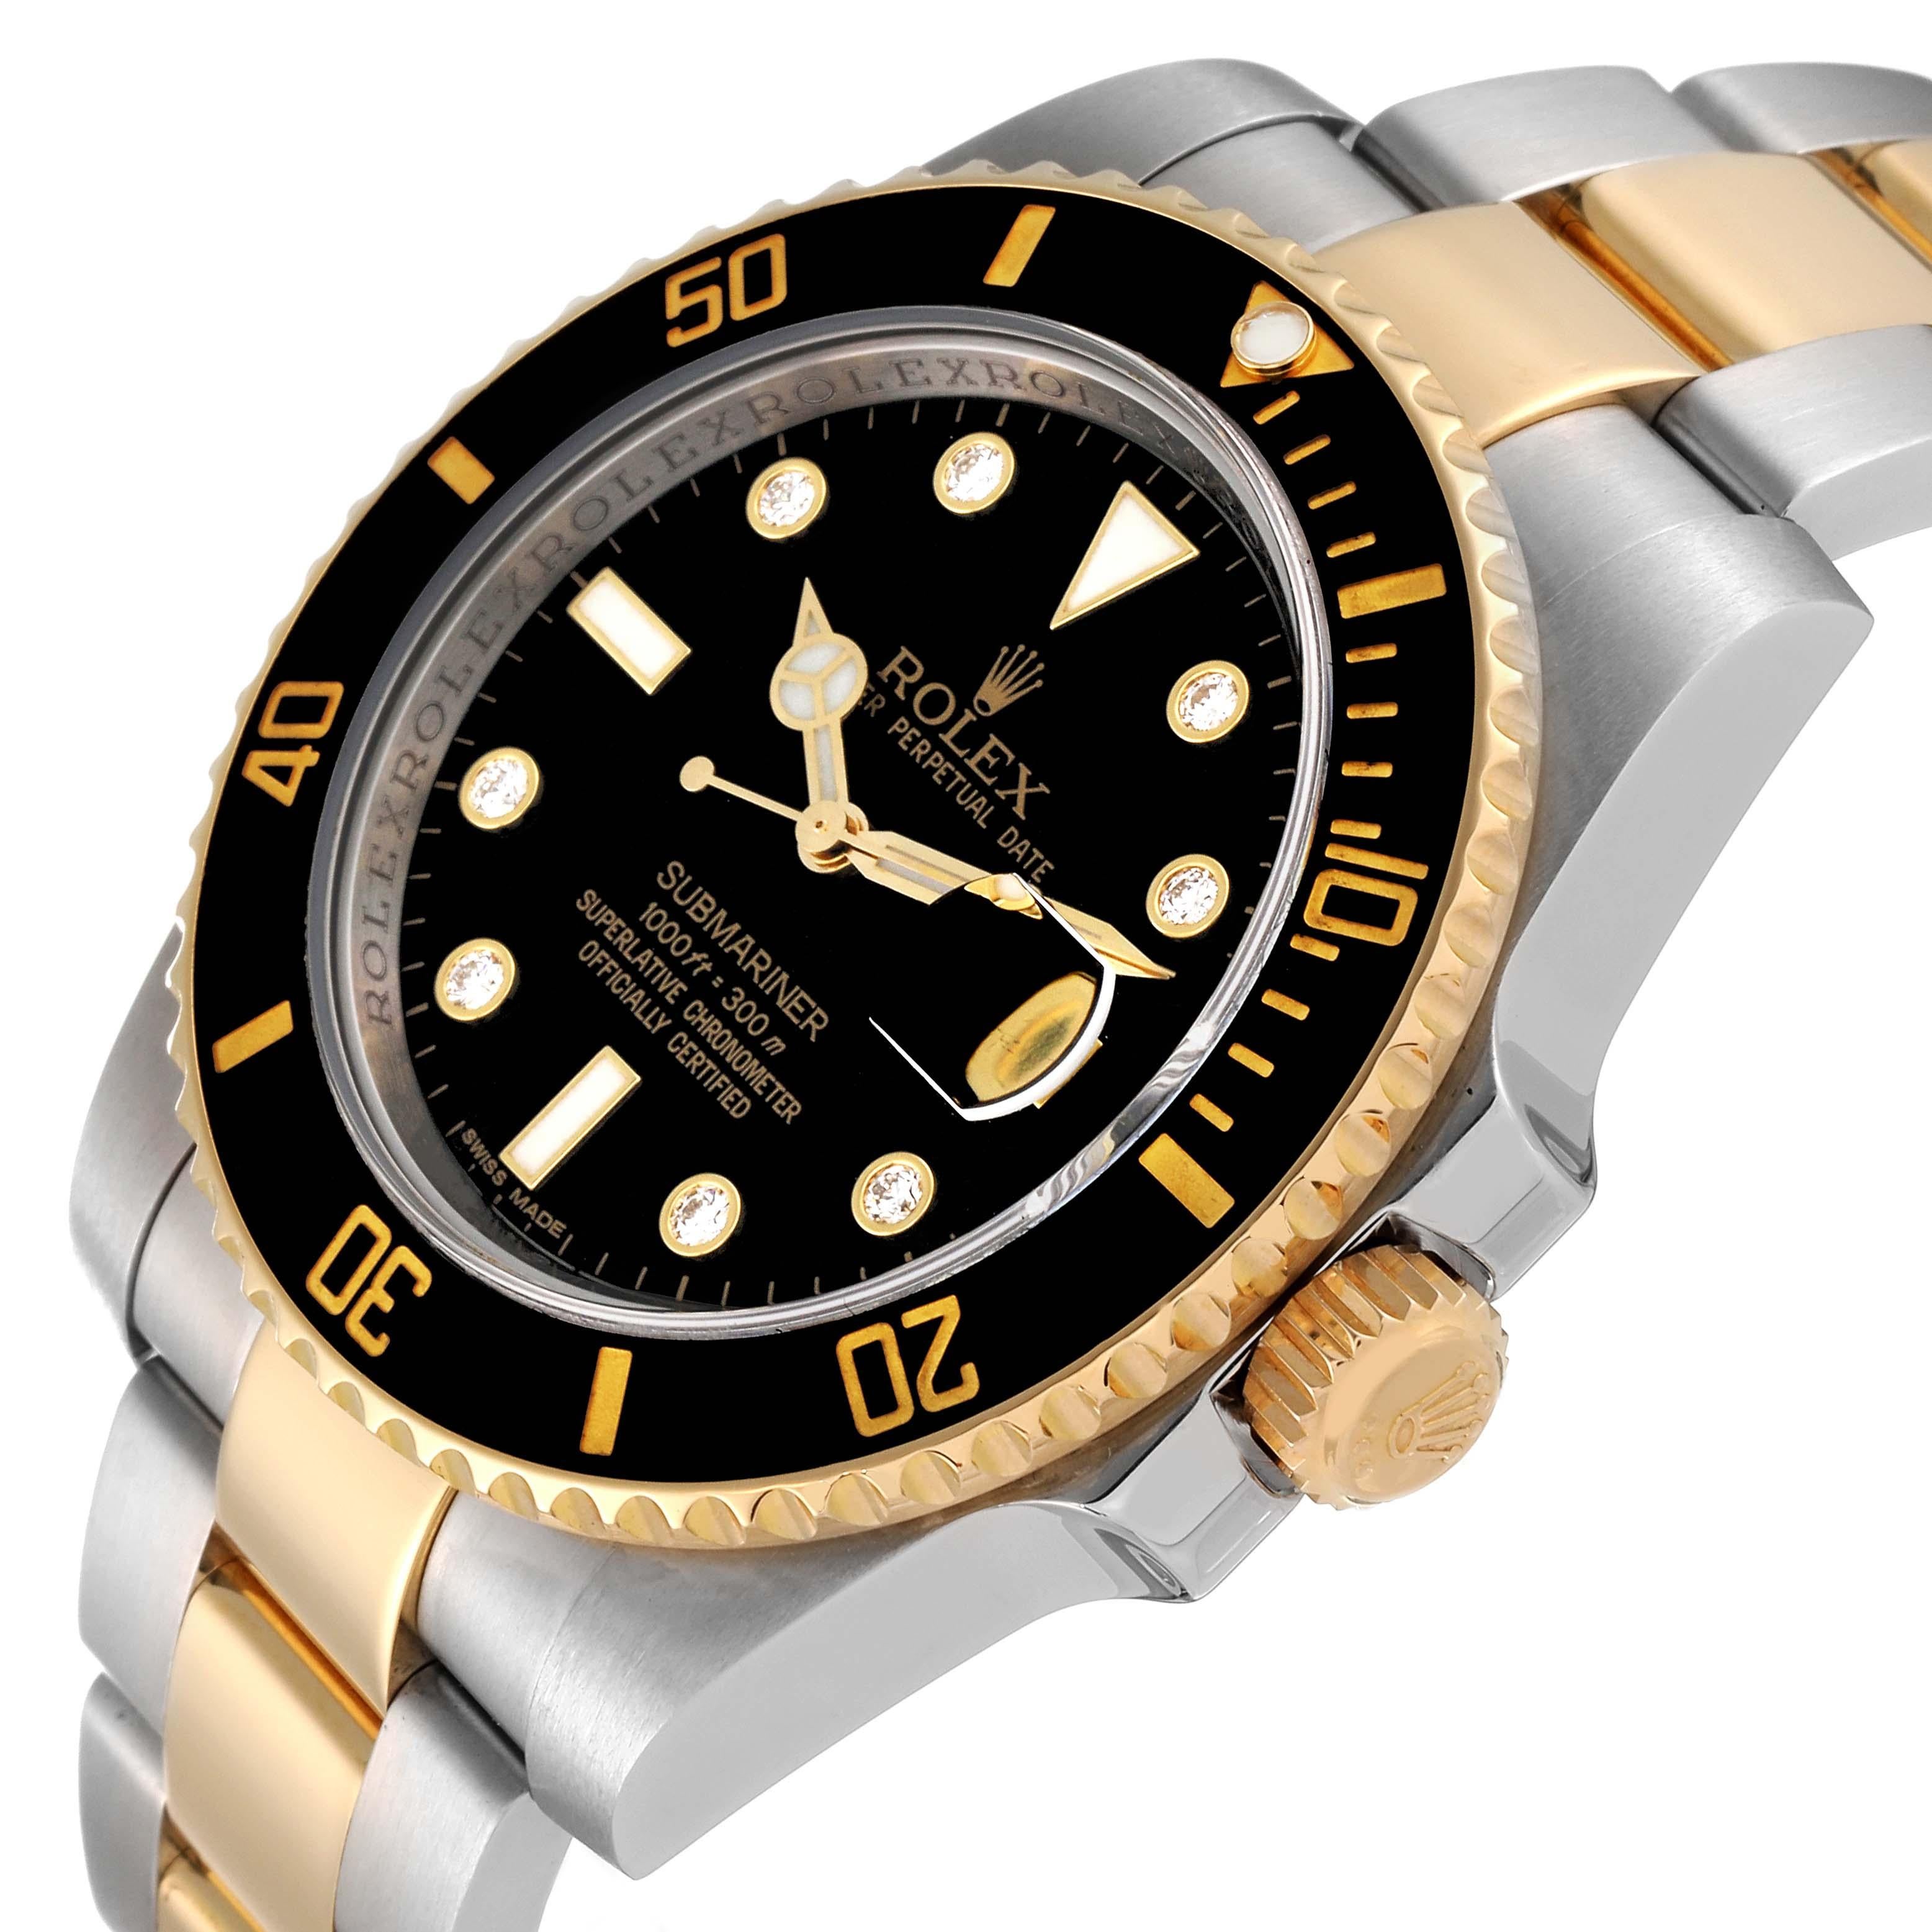 Rolex Submariner Steel Yellow Gold Black Diamond Dial Mens Watch 116613 Box Card For Sale 7